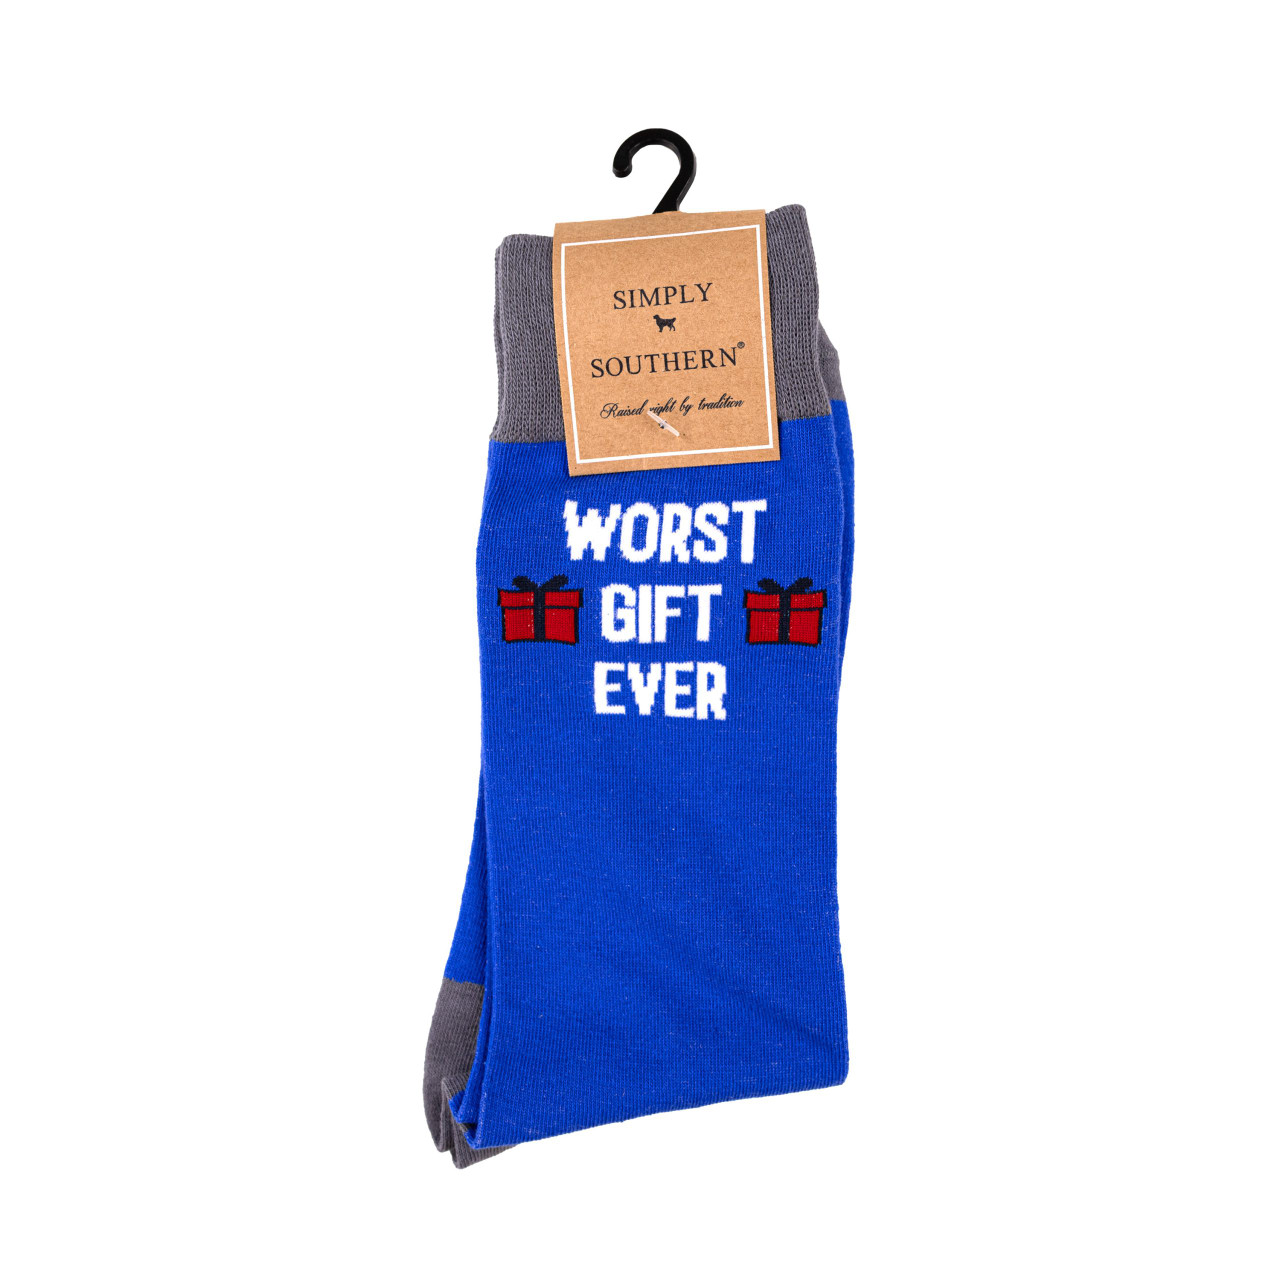 SIMPLY SOUTHERN MEN'S SOCK GIFT - Pee Dee Outfitters